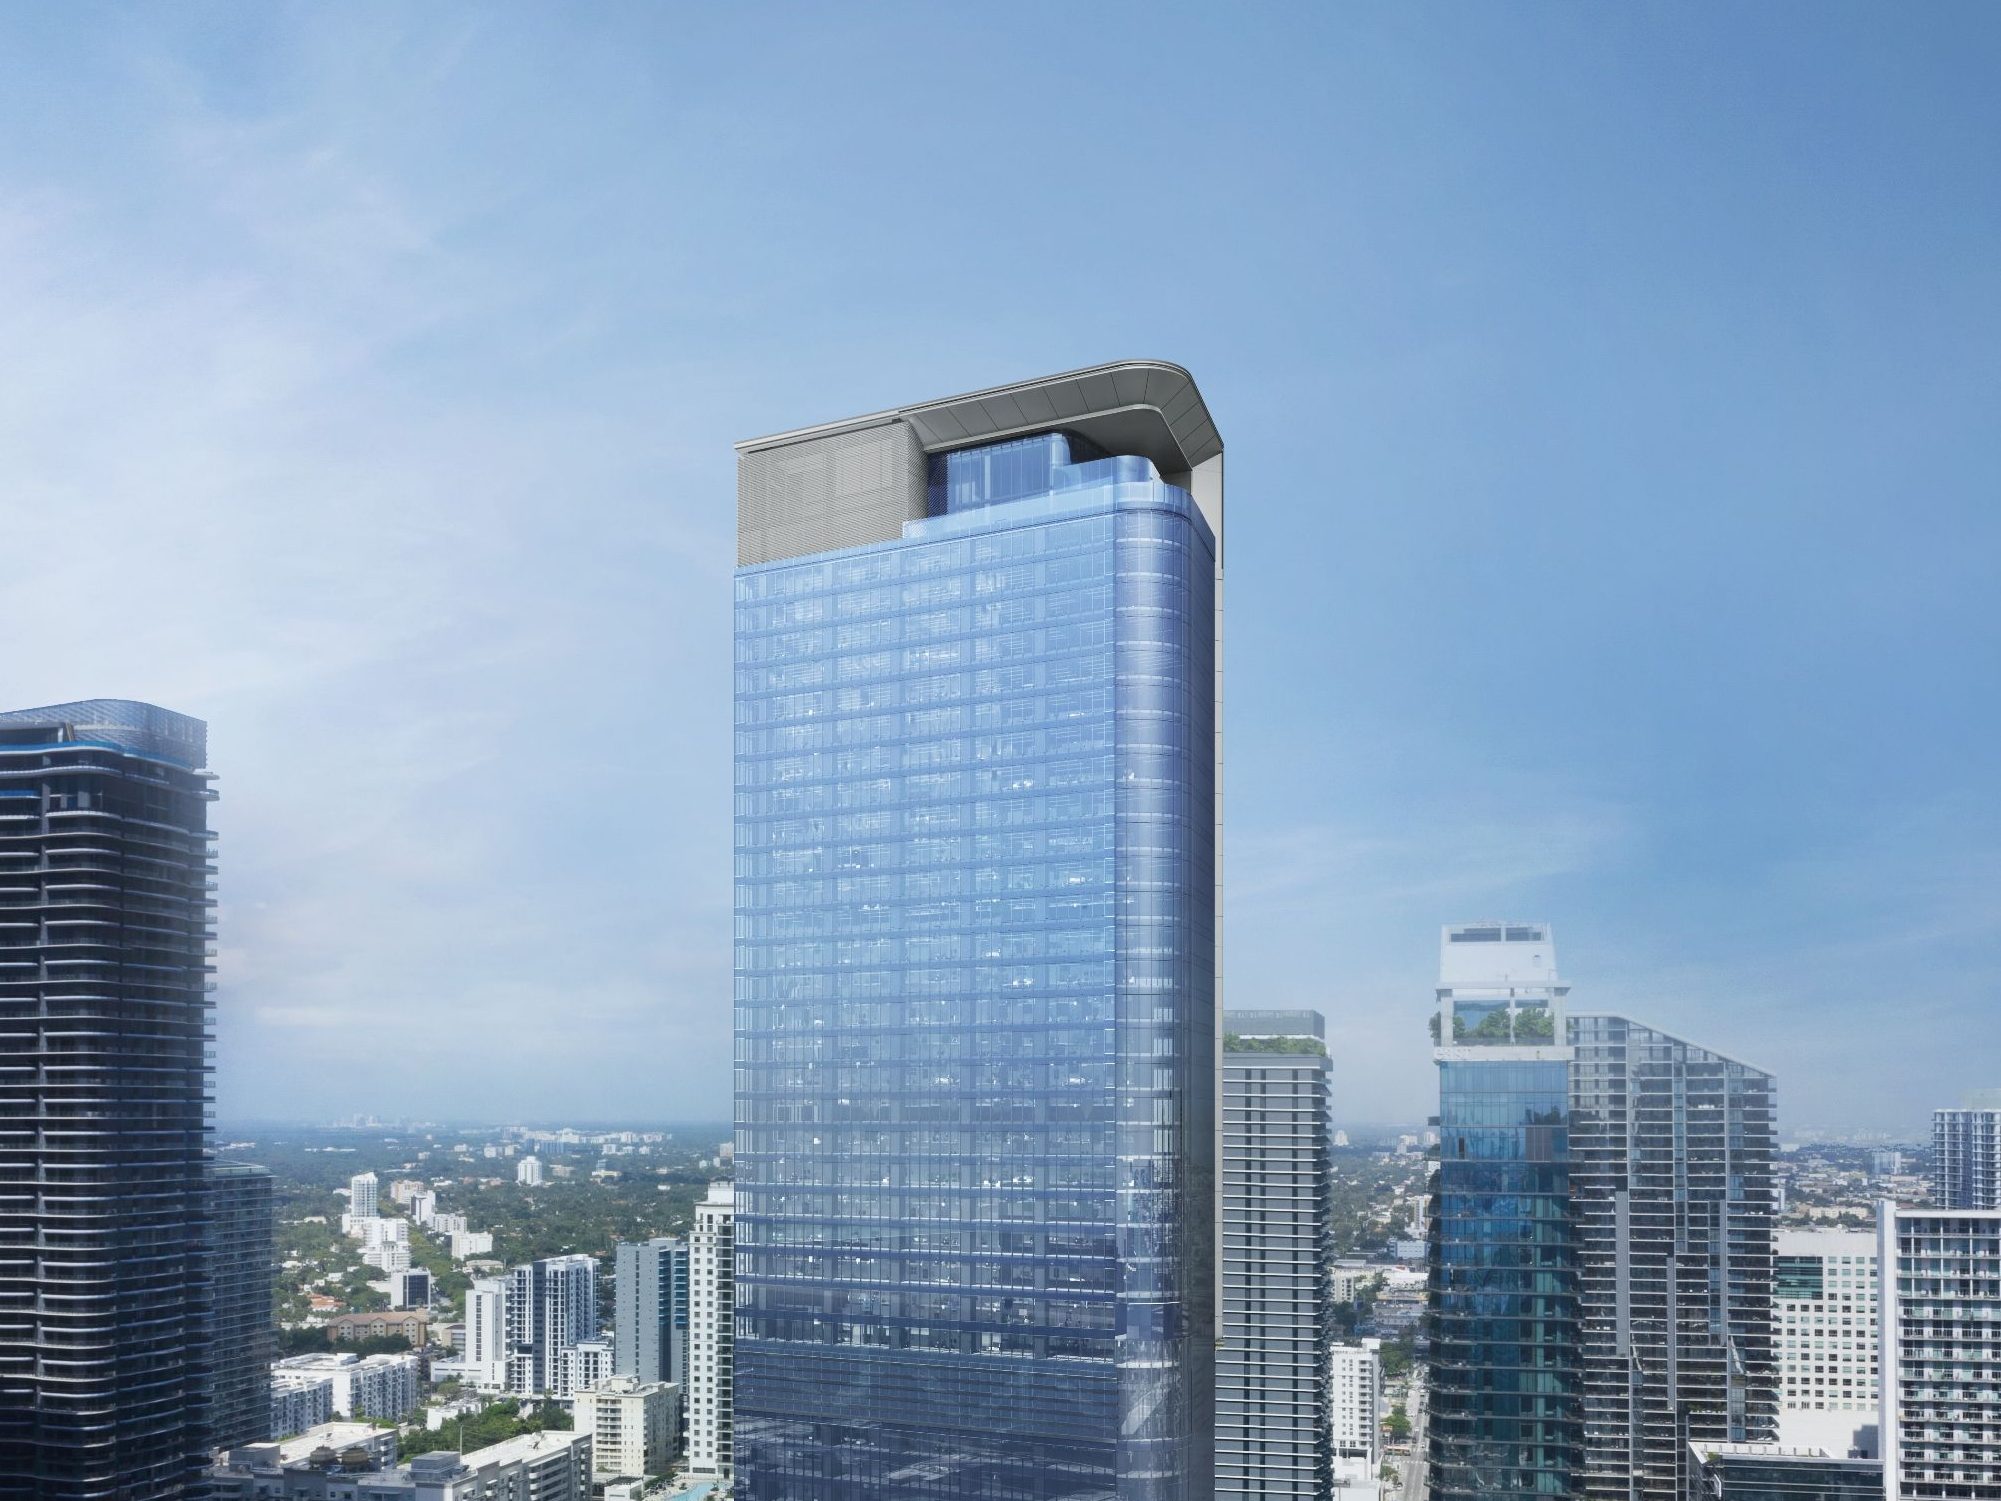 Miami’s 830 Brickell Secures 5M in Financing